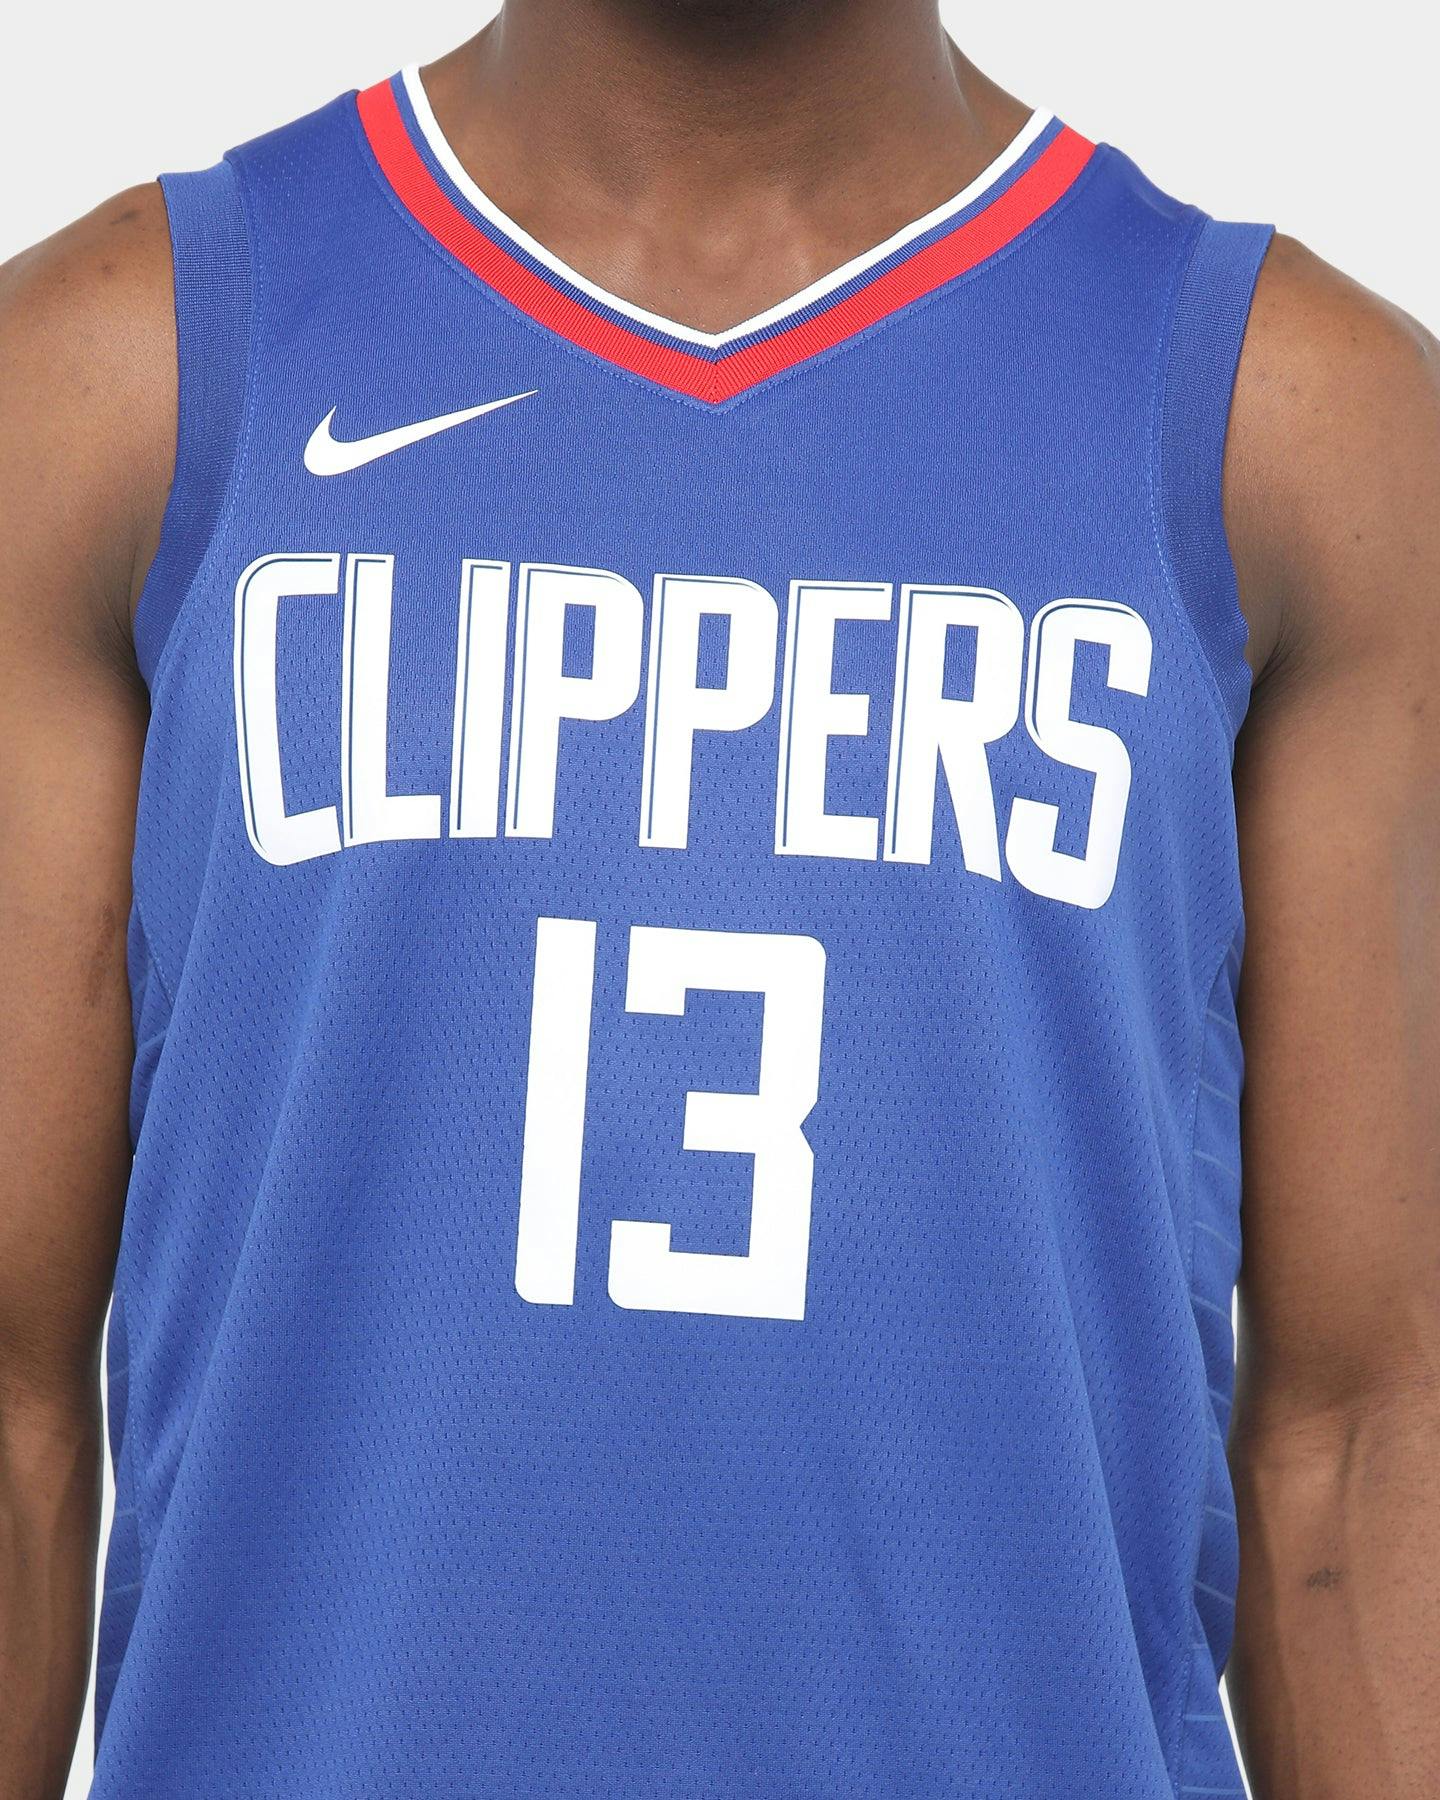 Paul George Jersey Wallpaper Clippers : Paul George LA Clippers Nike